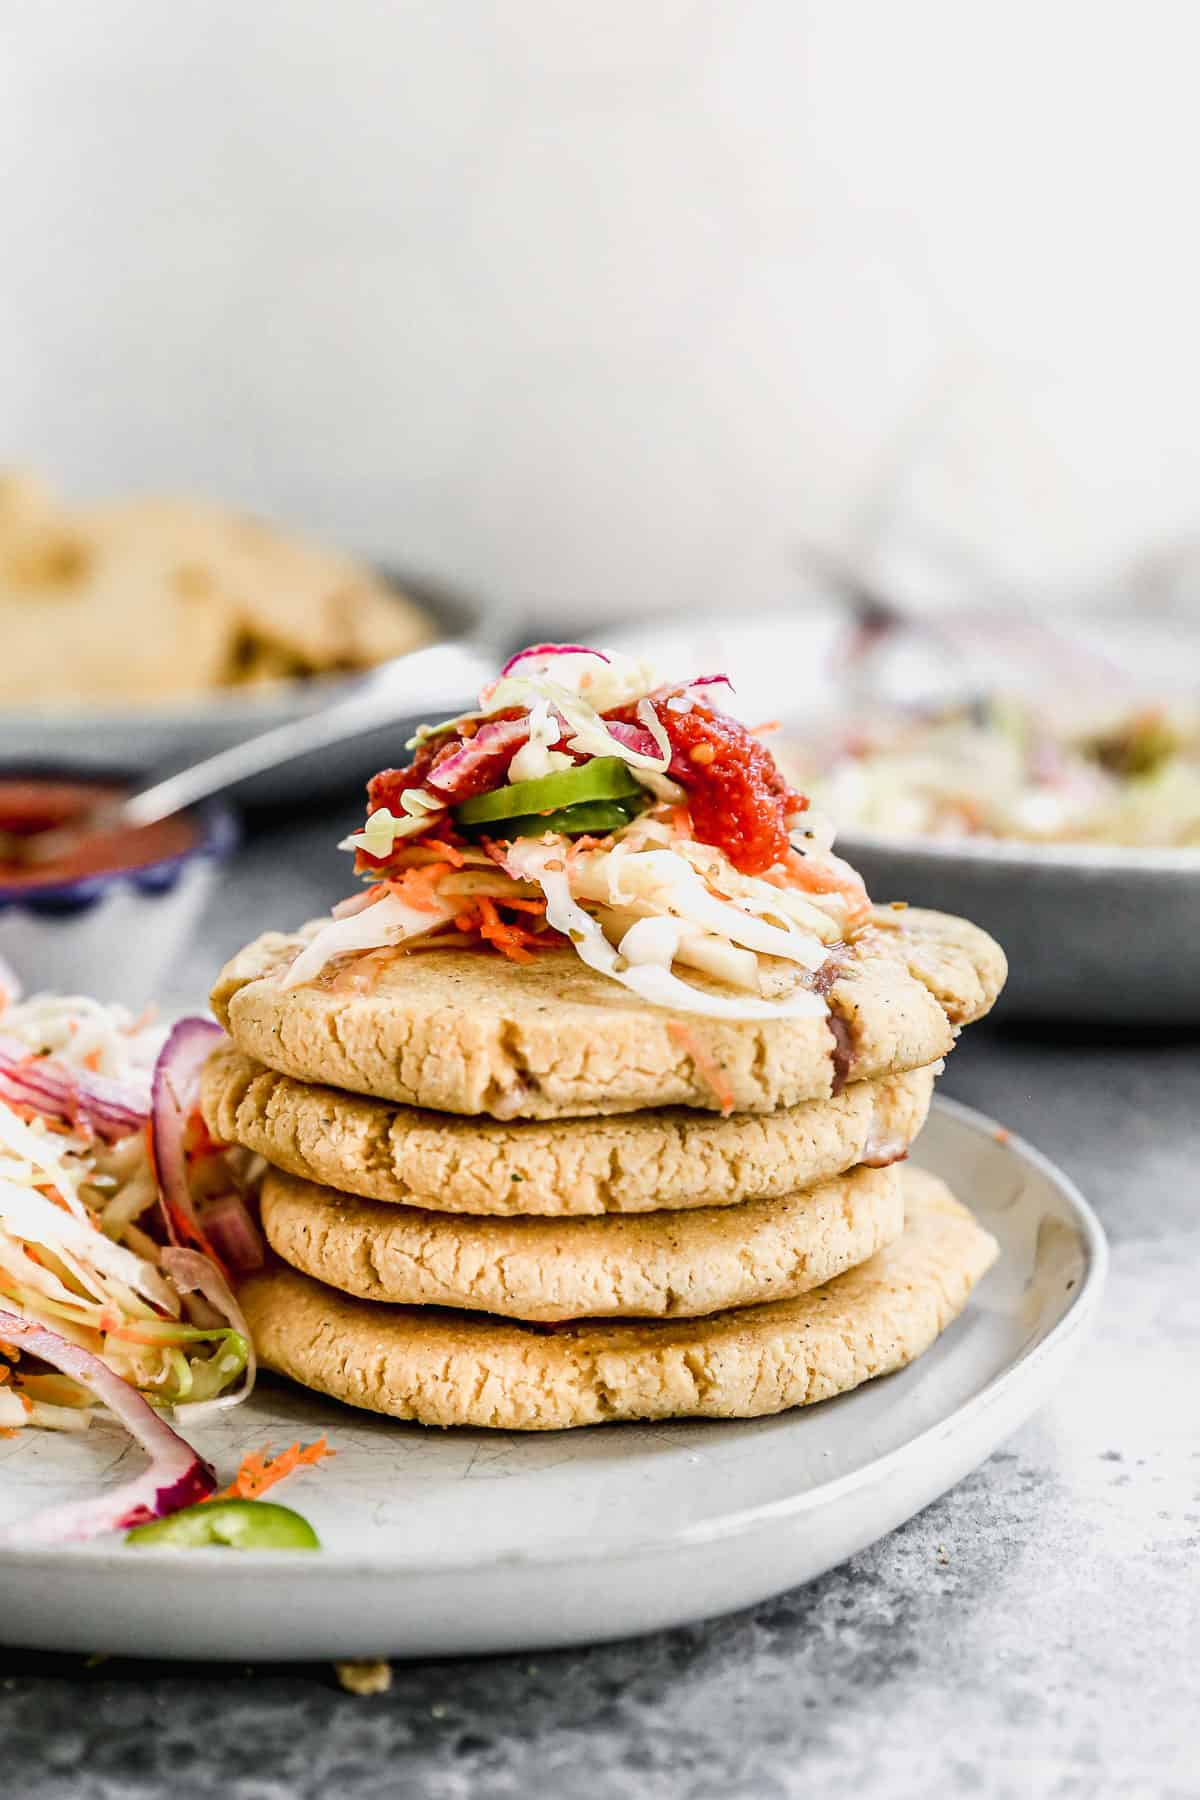 A stack of four homemade Pupusas topped with curtido and salsa roja, ready to enjoy.